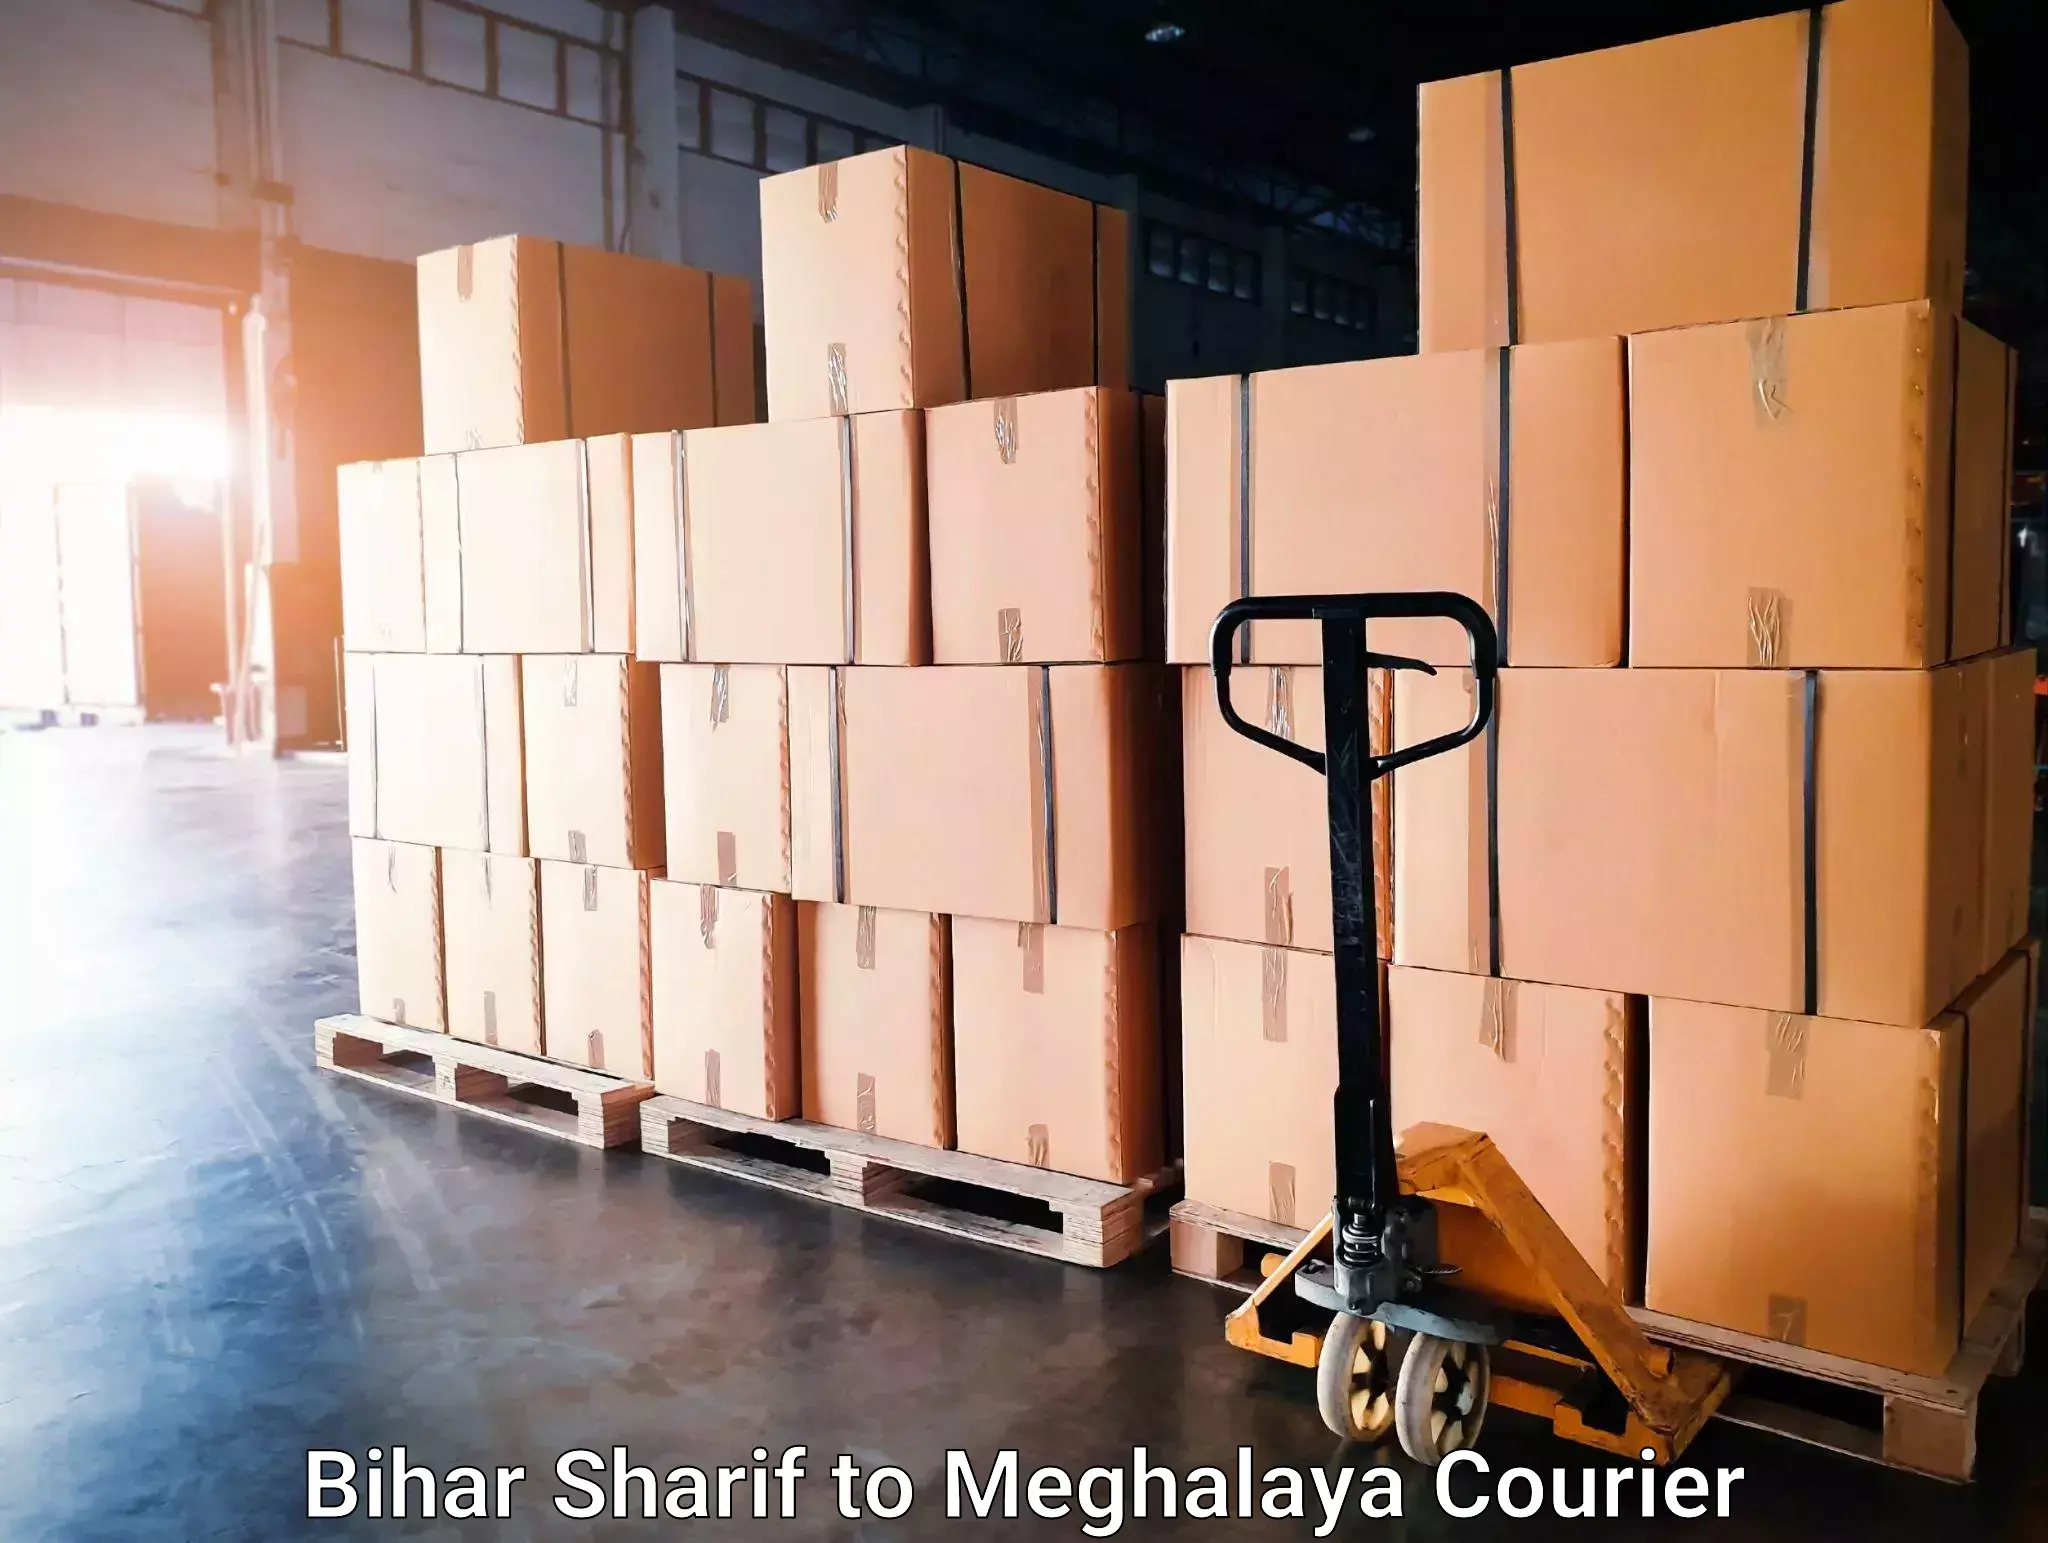 Skilled furniture movers in Bihar Sharif to Shillong